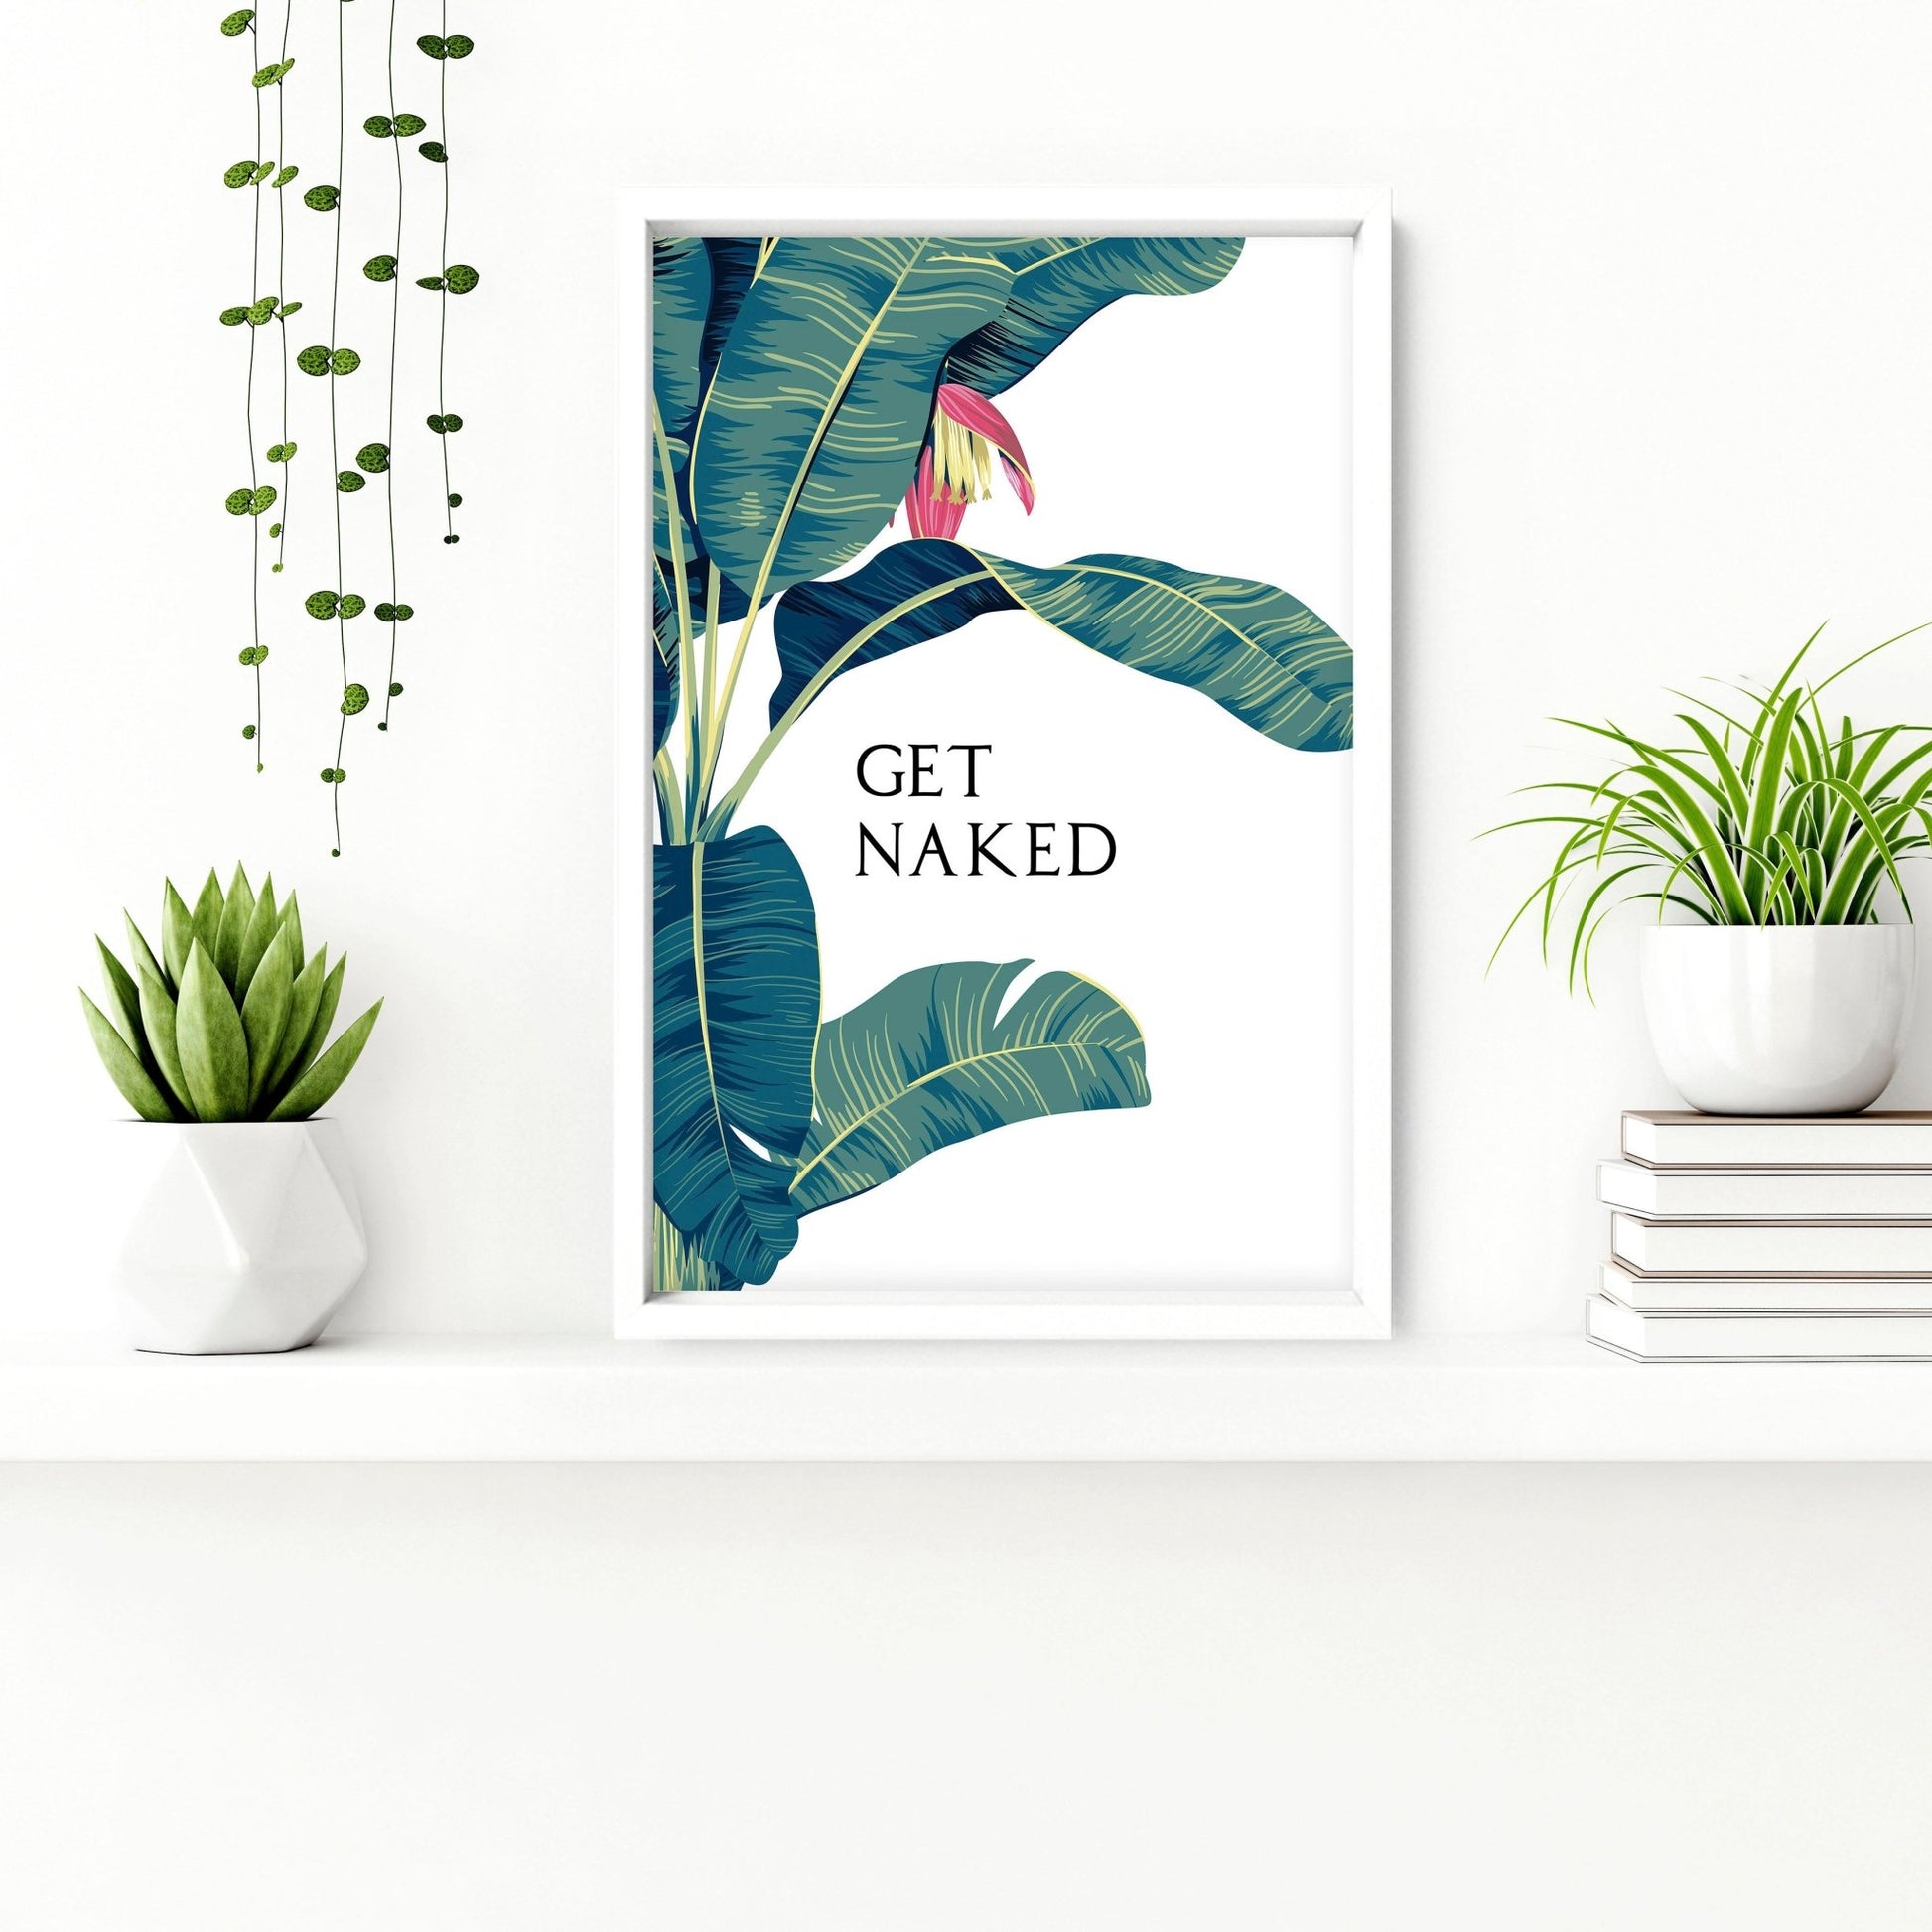 Tropical prints for the bathroom walls | Set of 2 art prints - About Wall Art